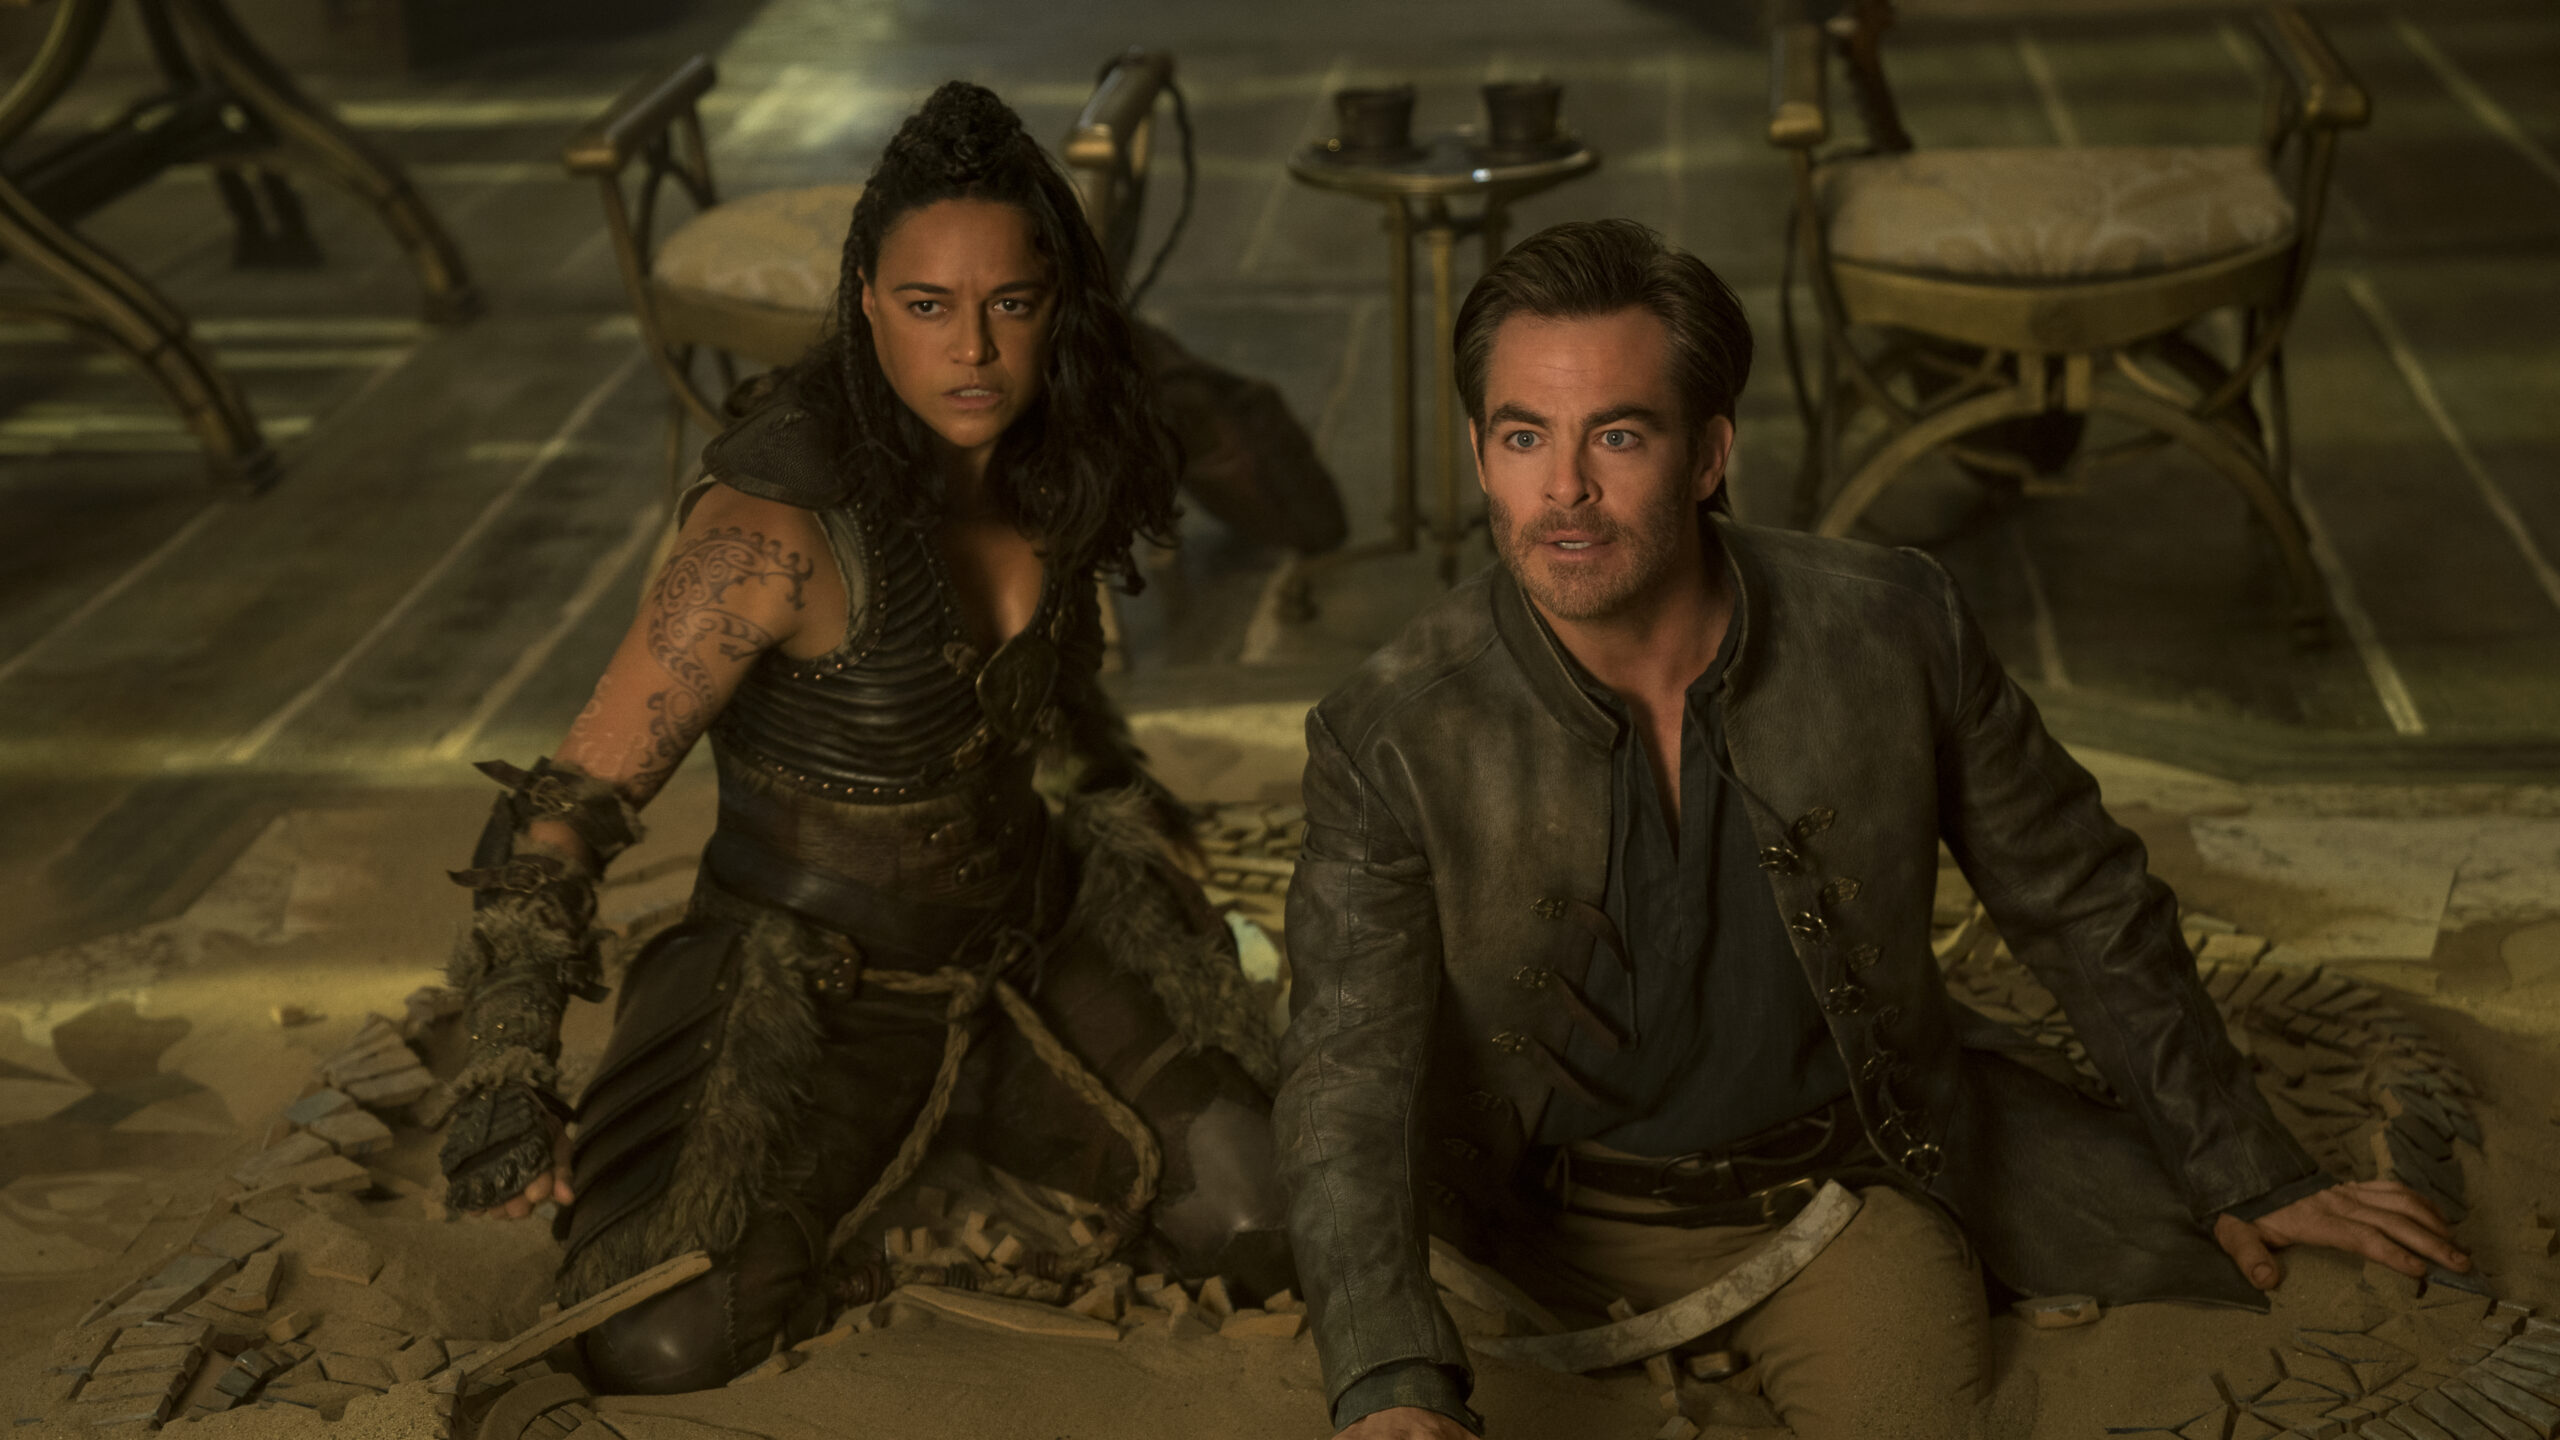 Chris Pine plays Edgin and Michelle Rodriguez plays Holga in Dungeons & Dragons: Honor Among Thieves from Paramount Pictures and eOne.